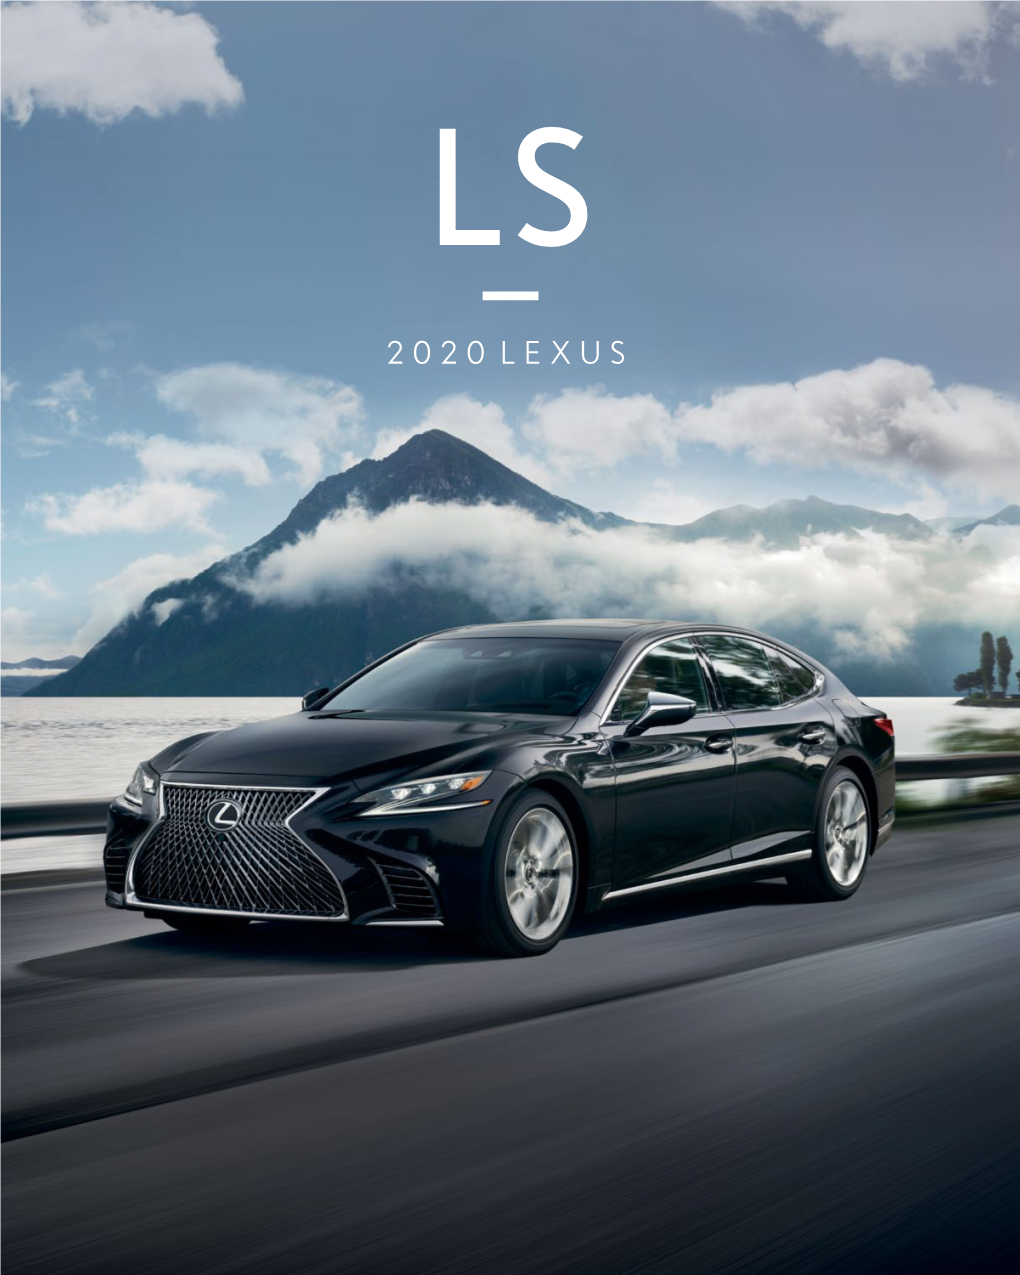 Brochure for the 2020 LS